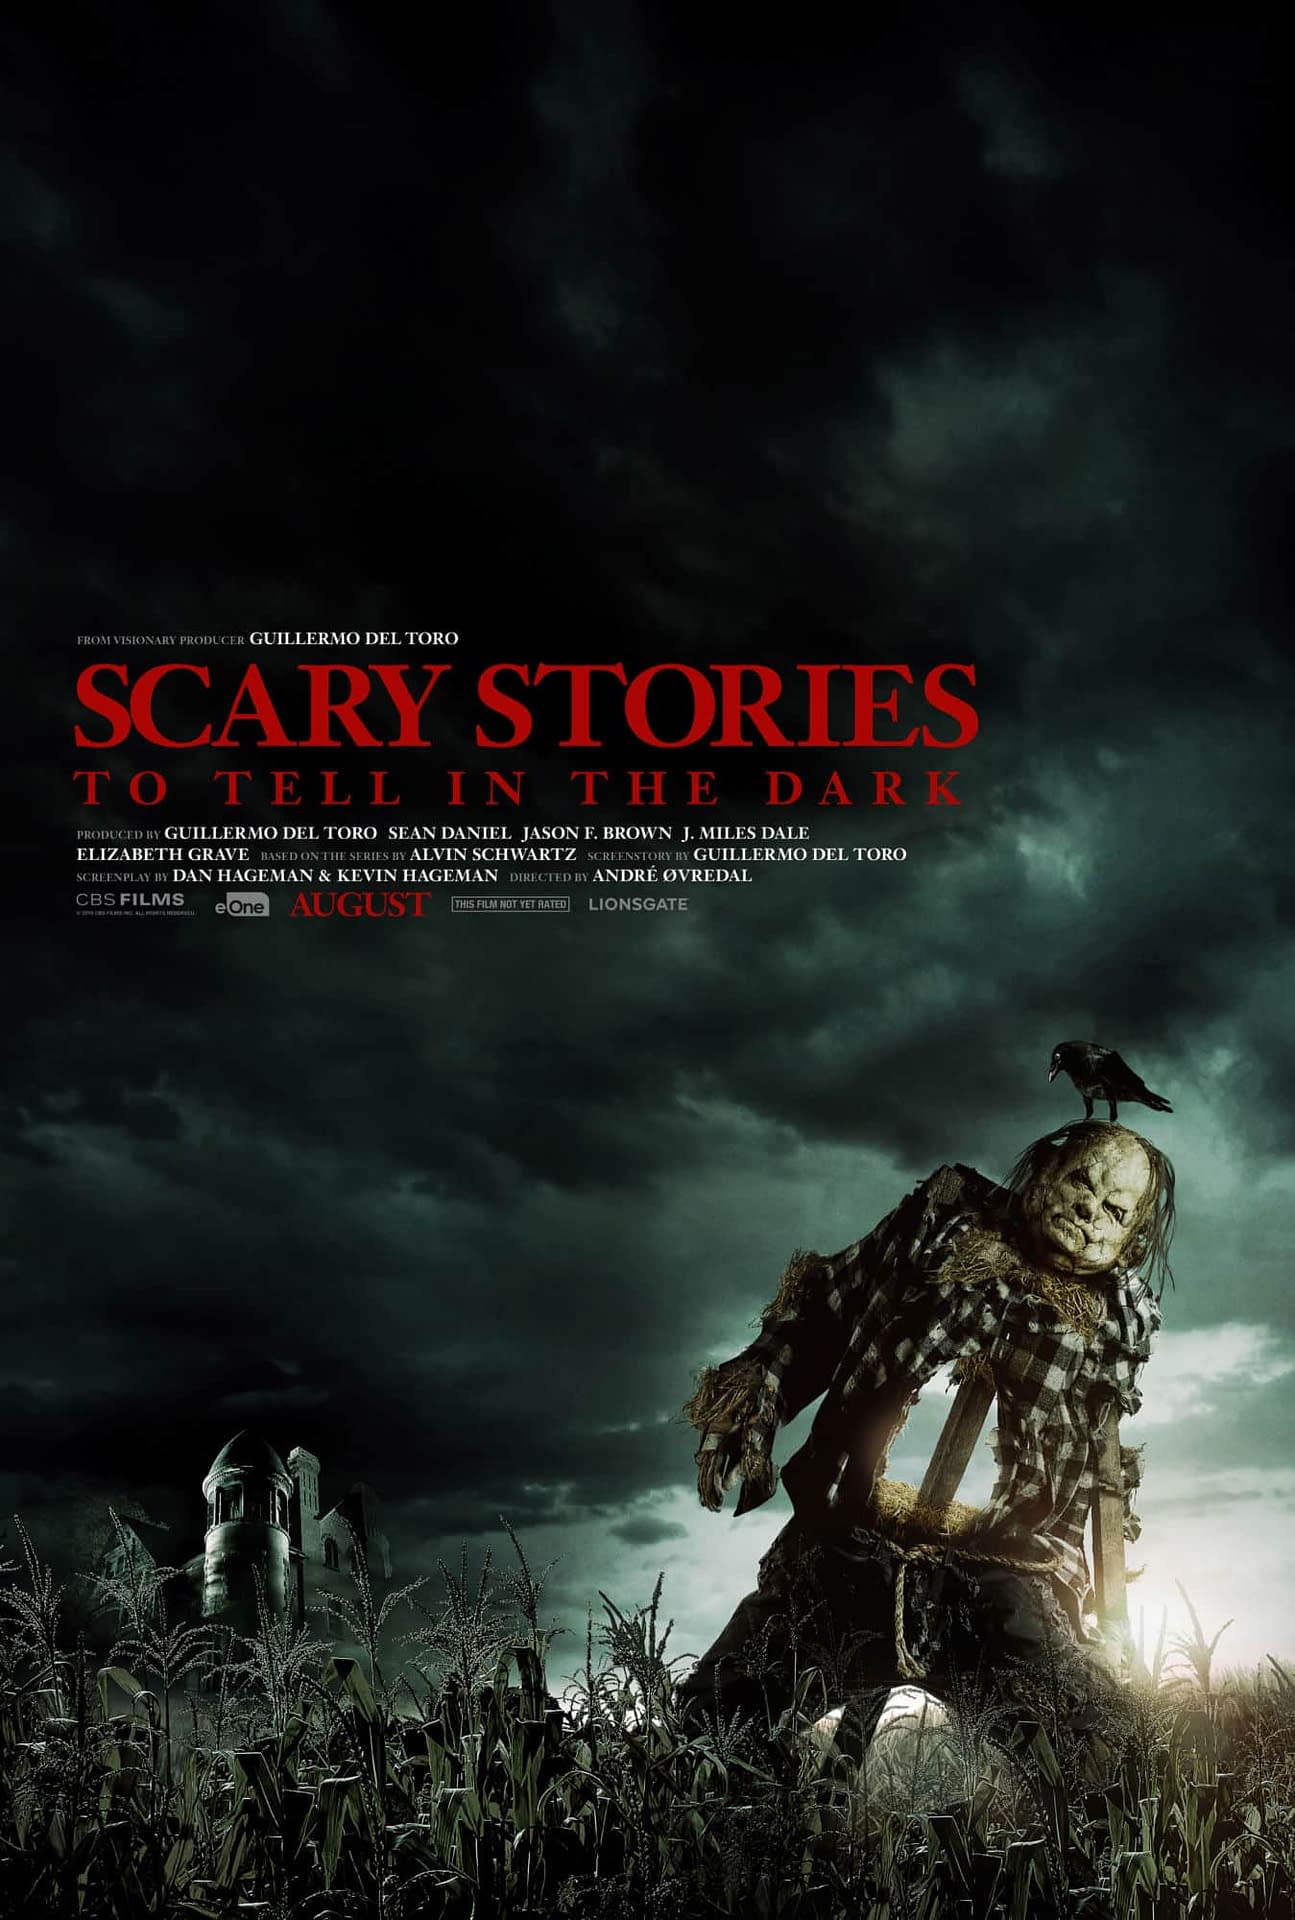 First Teaser Poster for Scary Stories to Tell in the Dark